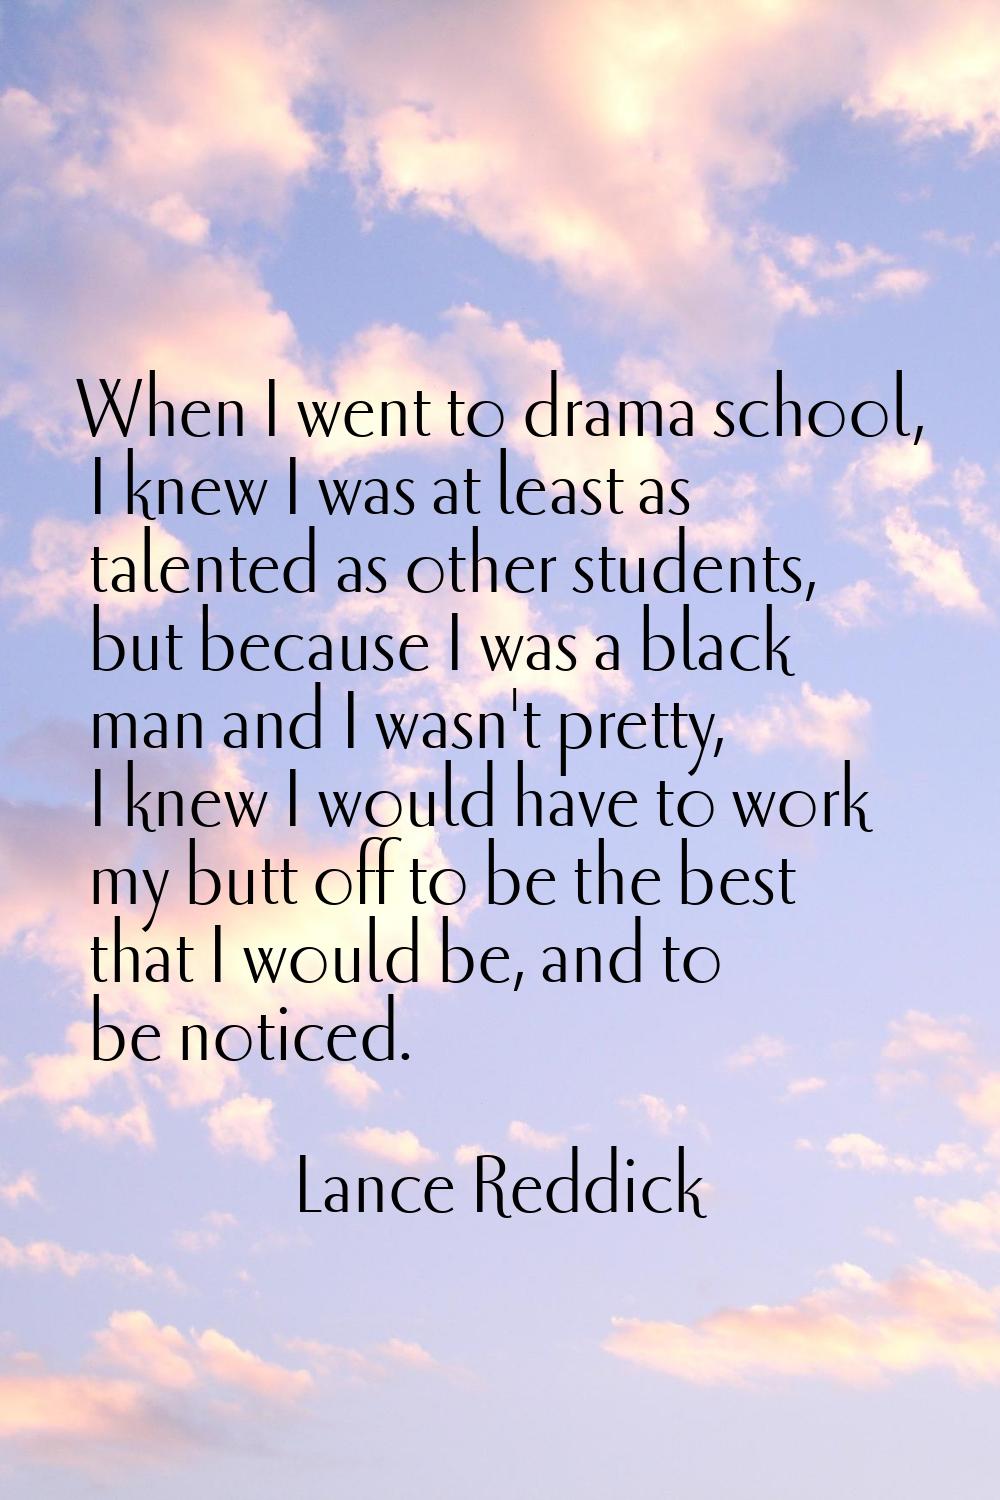 When I went to drama school, I knew I was at least as talented as other students, but because I was